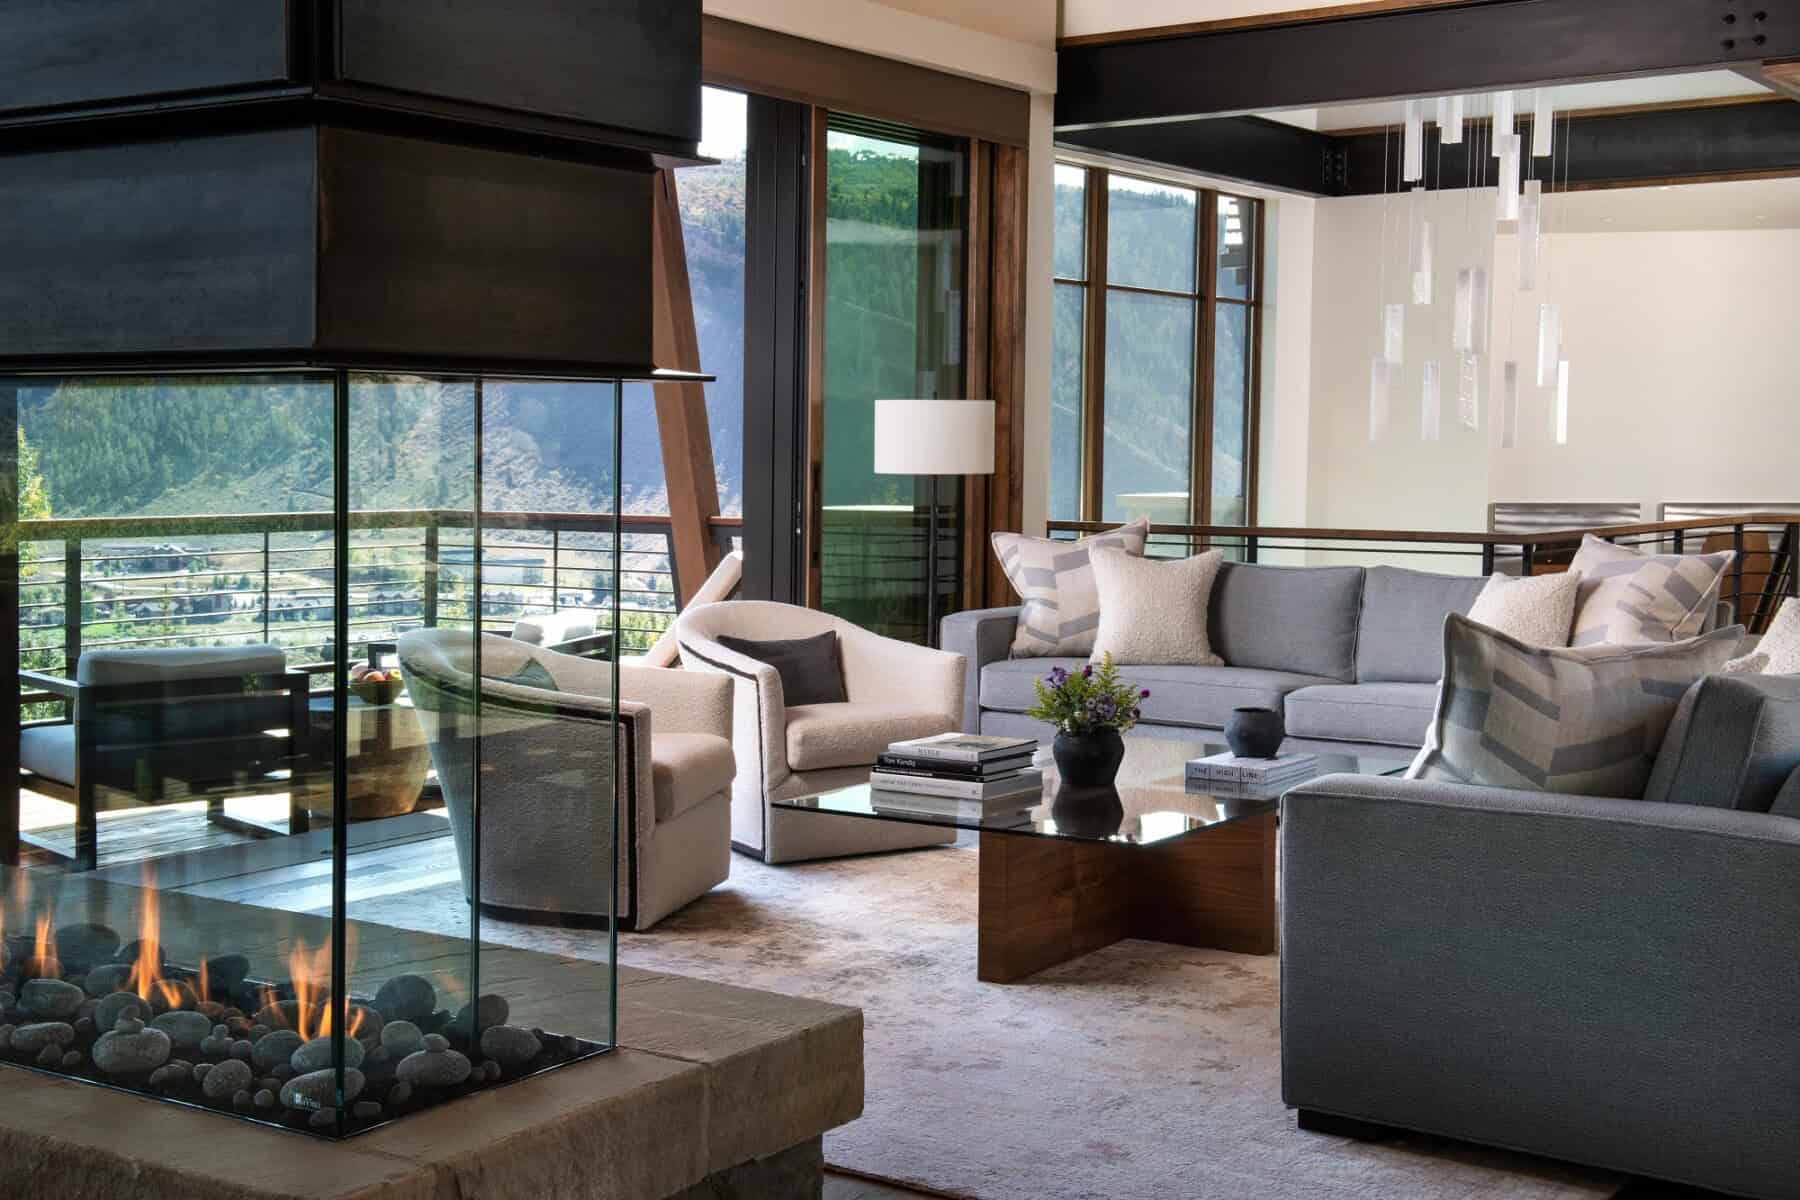 Living space from Creative Floor's retreat in cordillera collection.